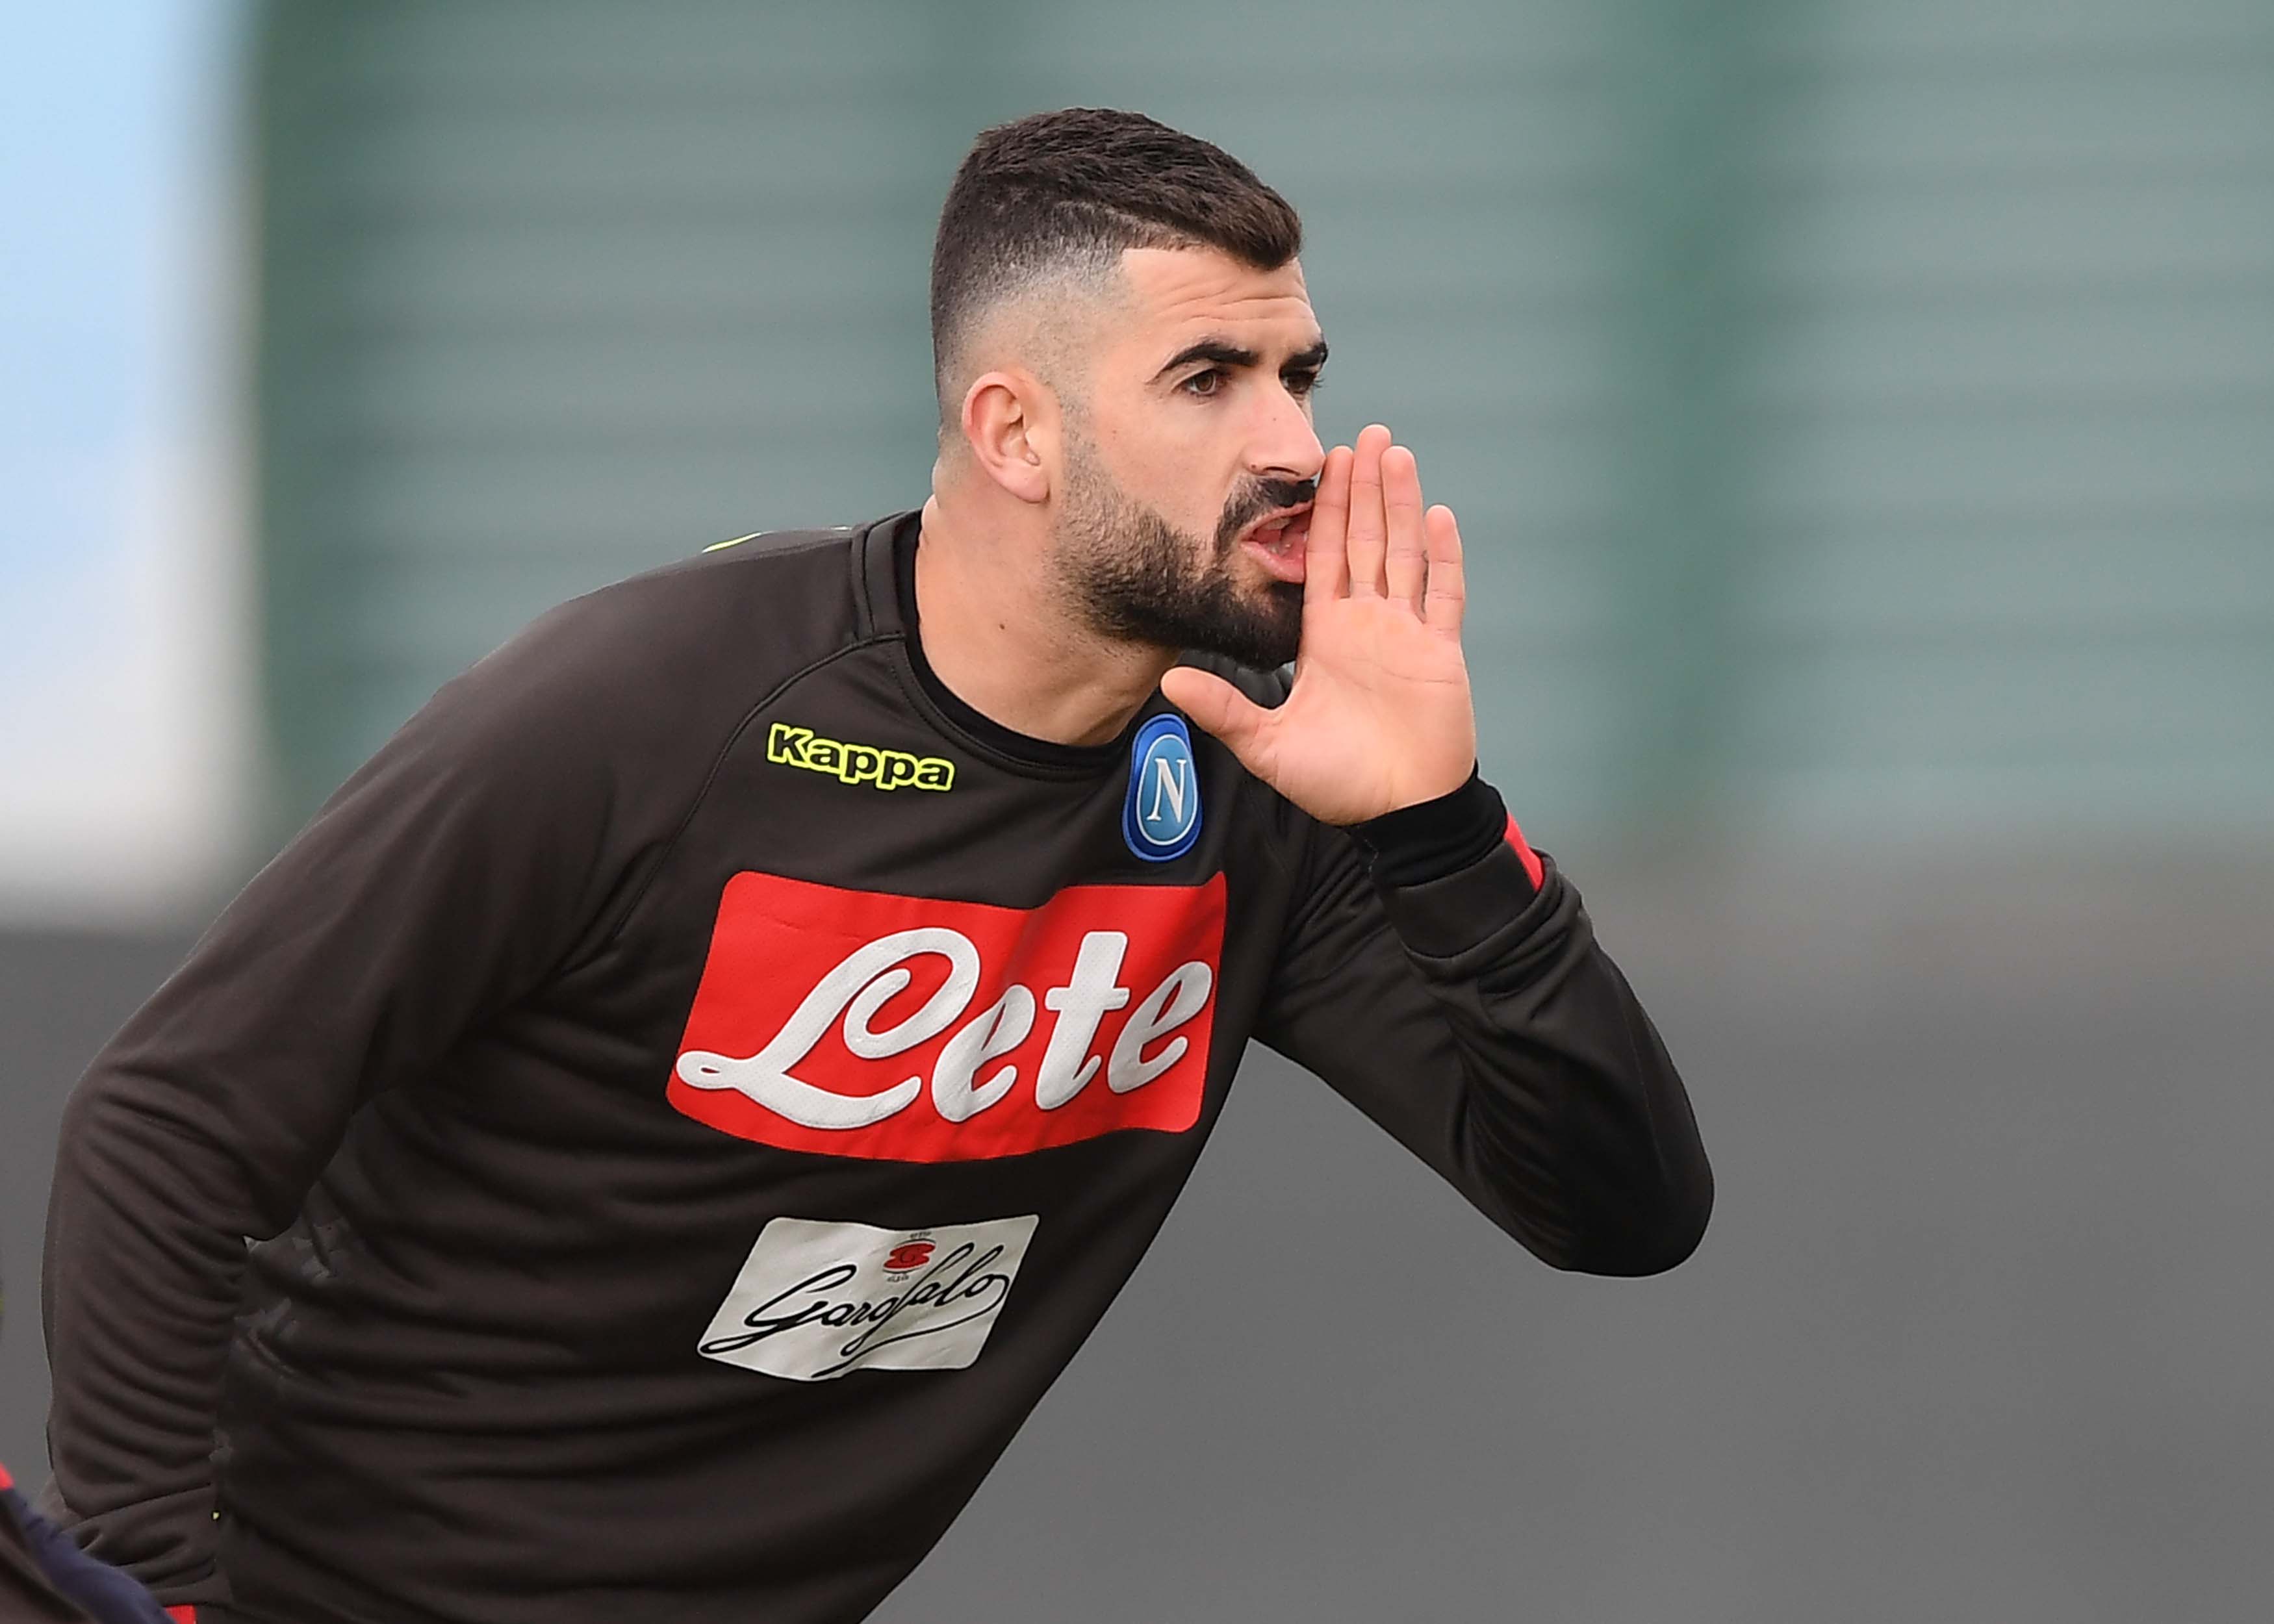 NAPLES, ITALY - JANUARY 17:  Elseid Hysaj during an SSC Napoli Training Session on January 17, 2019 in Naples, Italy.  (Photo by Ciro Sarpa  SSC NAPOLI/SSC NAPOLI via Getty Images)